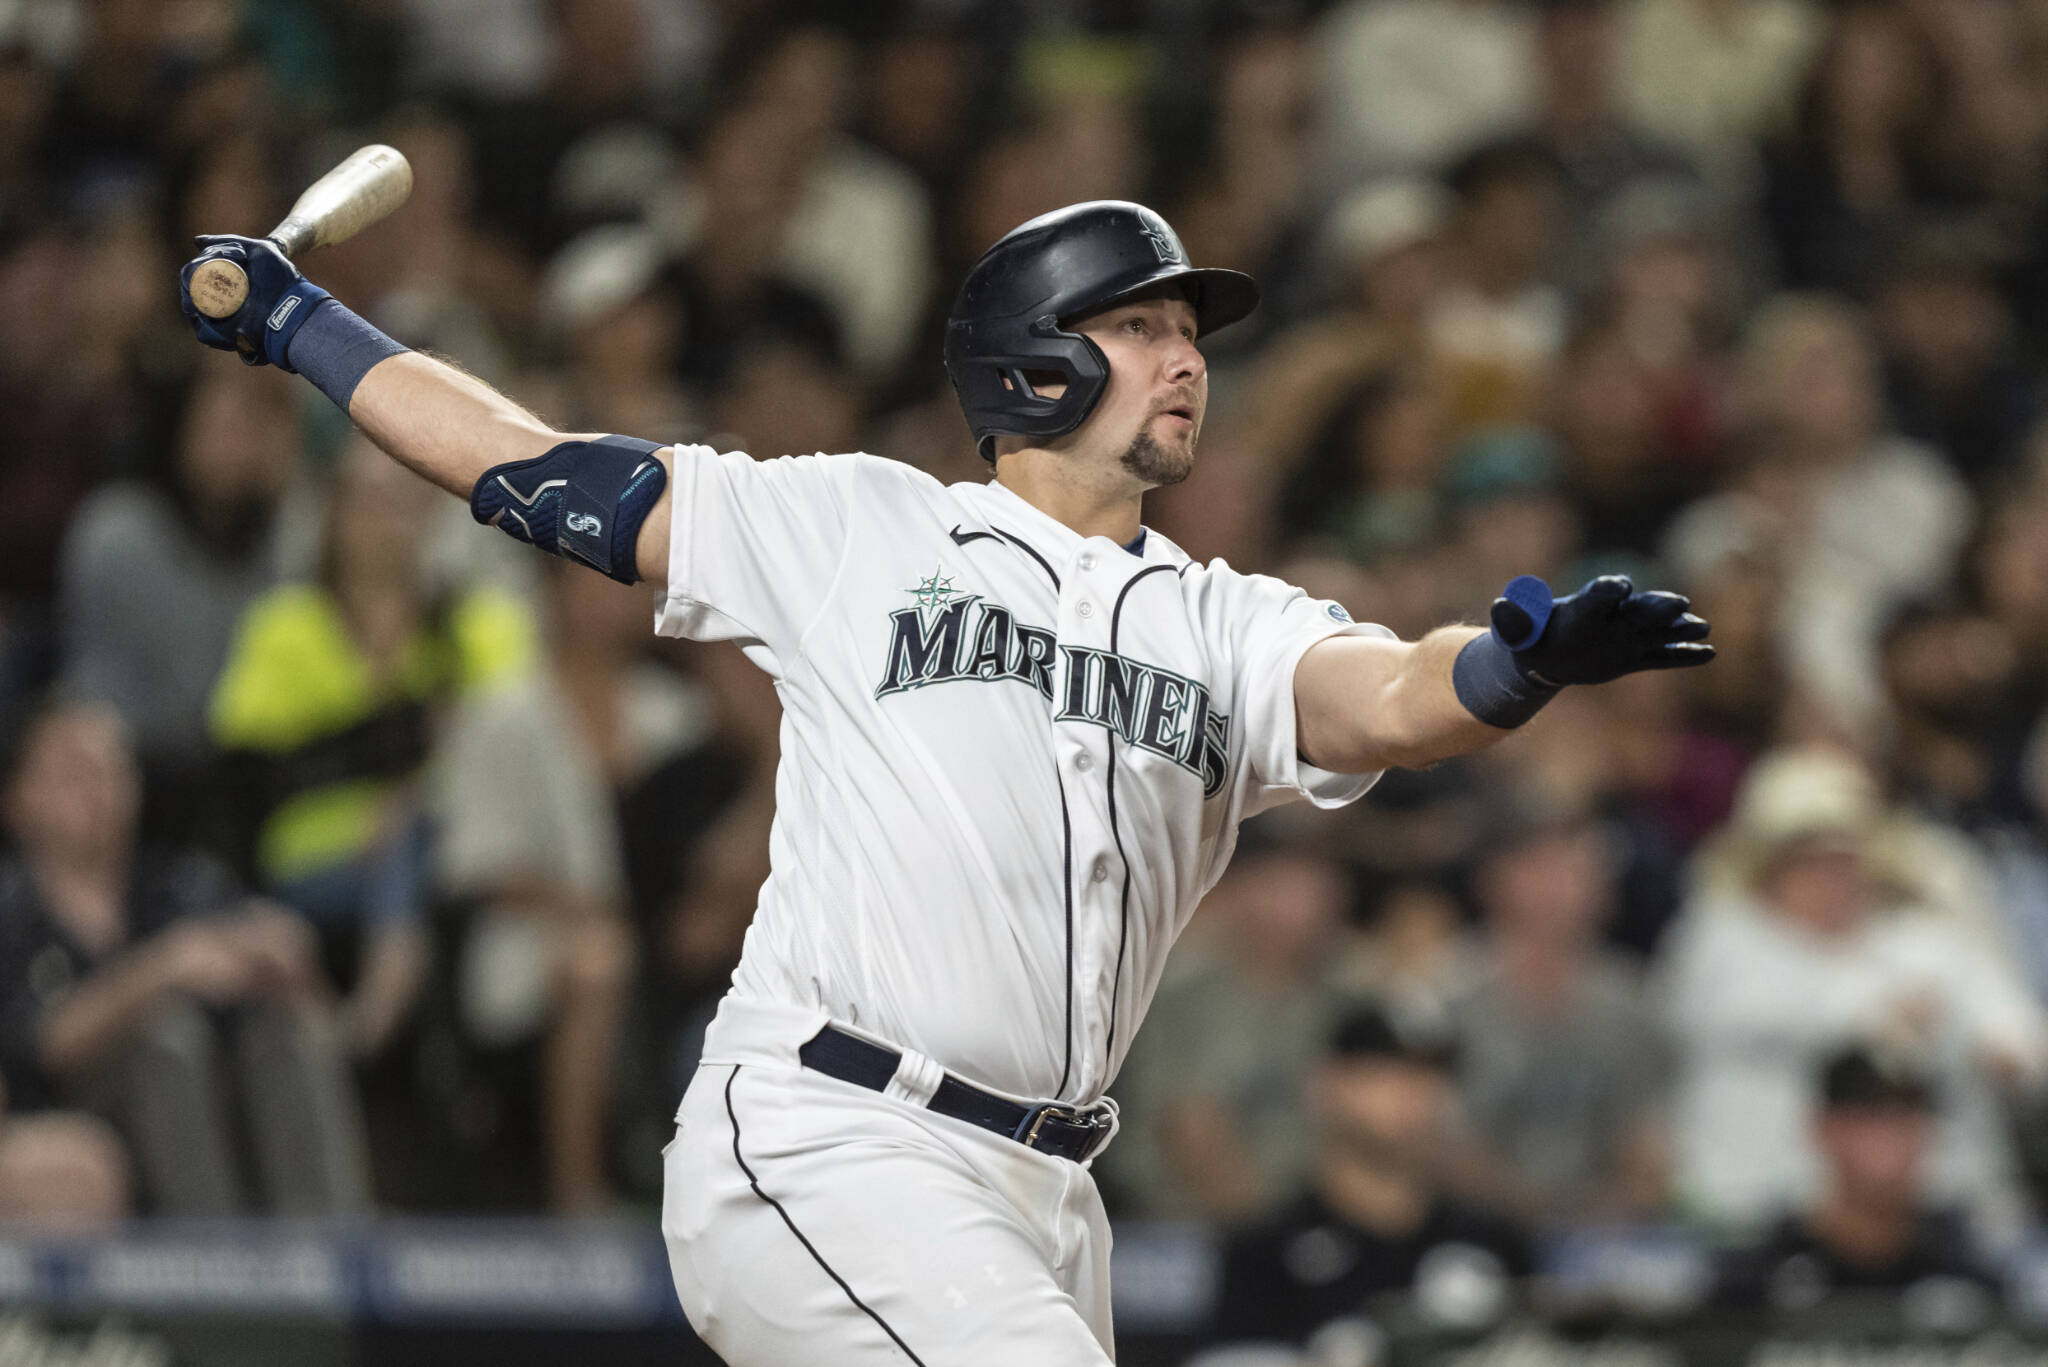 The Mariners’ Cal Raleigh watches his two-run home run off White Sox relief pitcher Reynaldo Lopez during the eighth inning of a game Tuesday in Seattle. (AP Photo/Stephen Brashear)